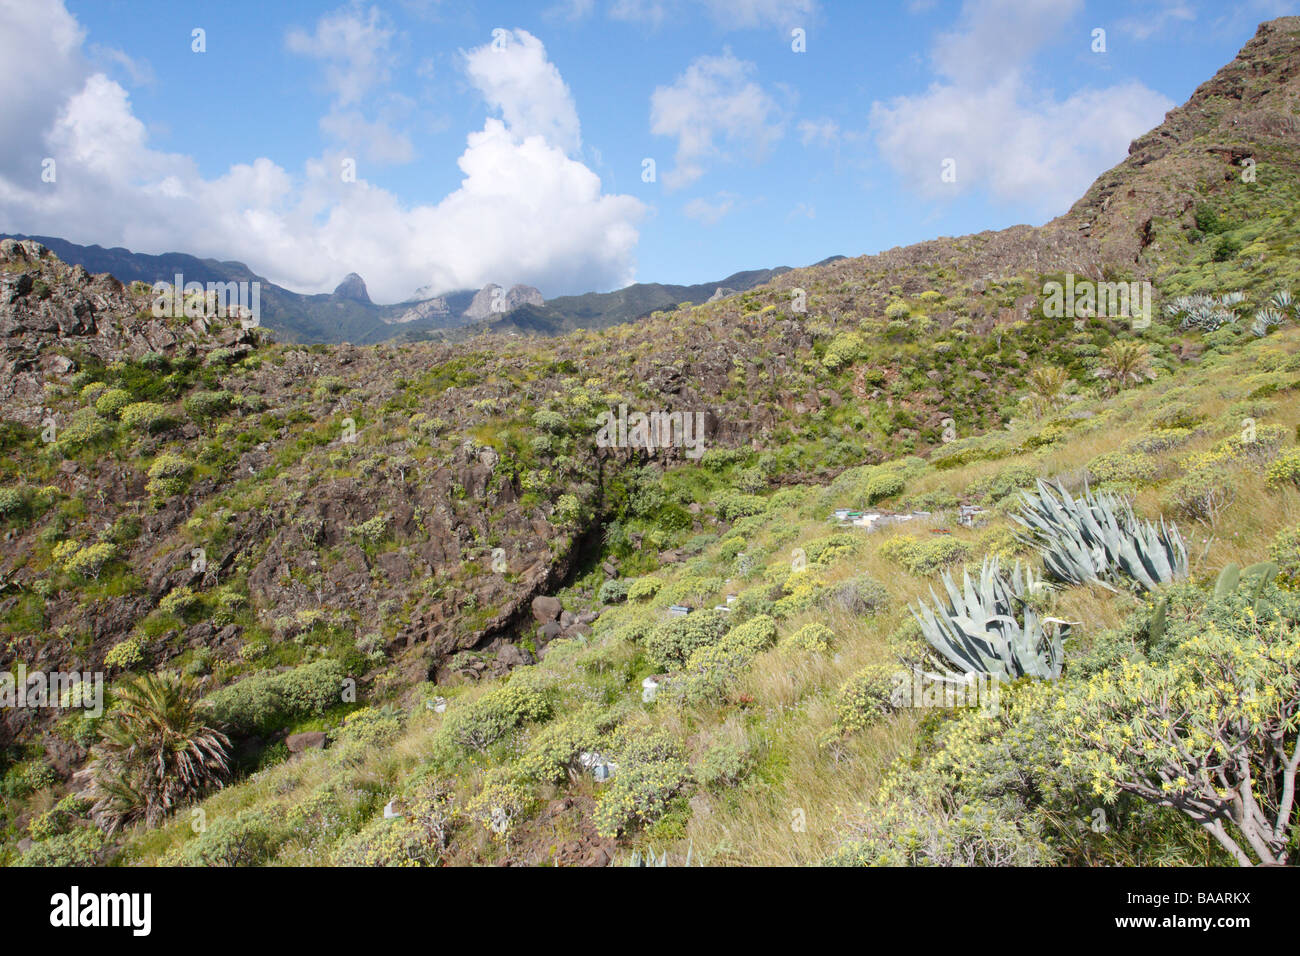 Near Las Casetas, La Gomera, Canary Islands. The Roques can be seen in the distance. Stock Photo